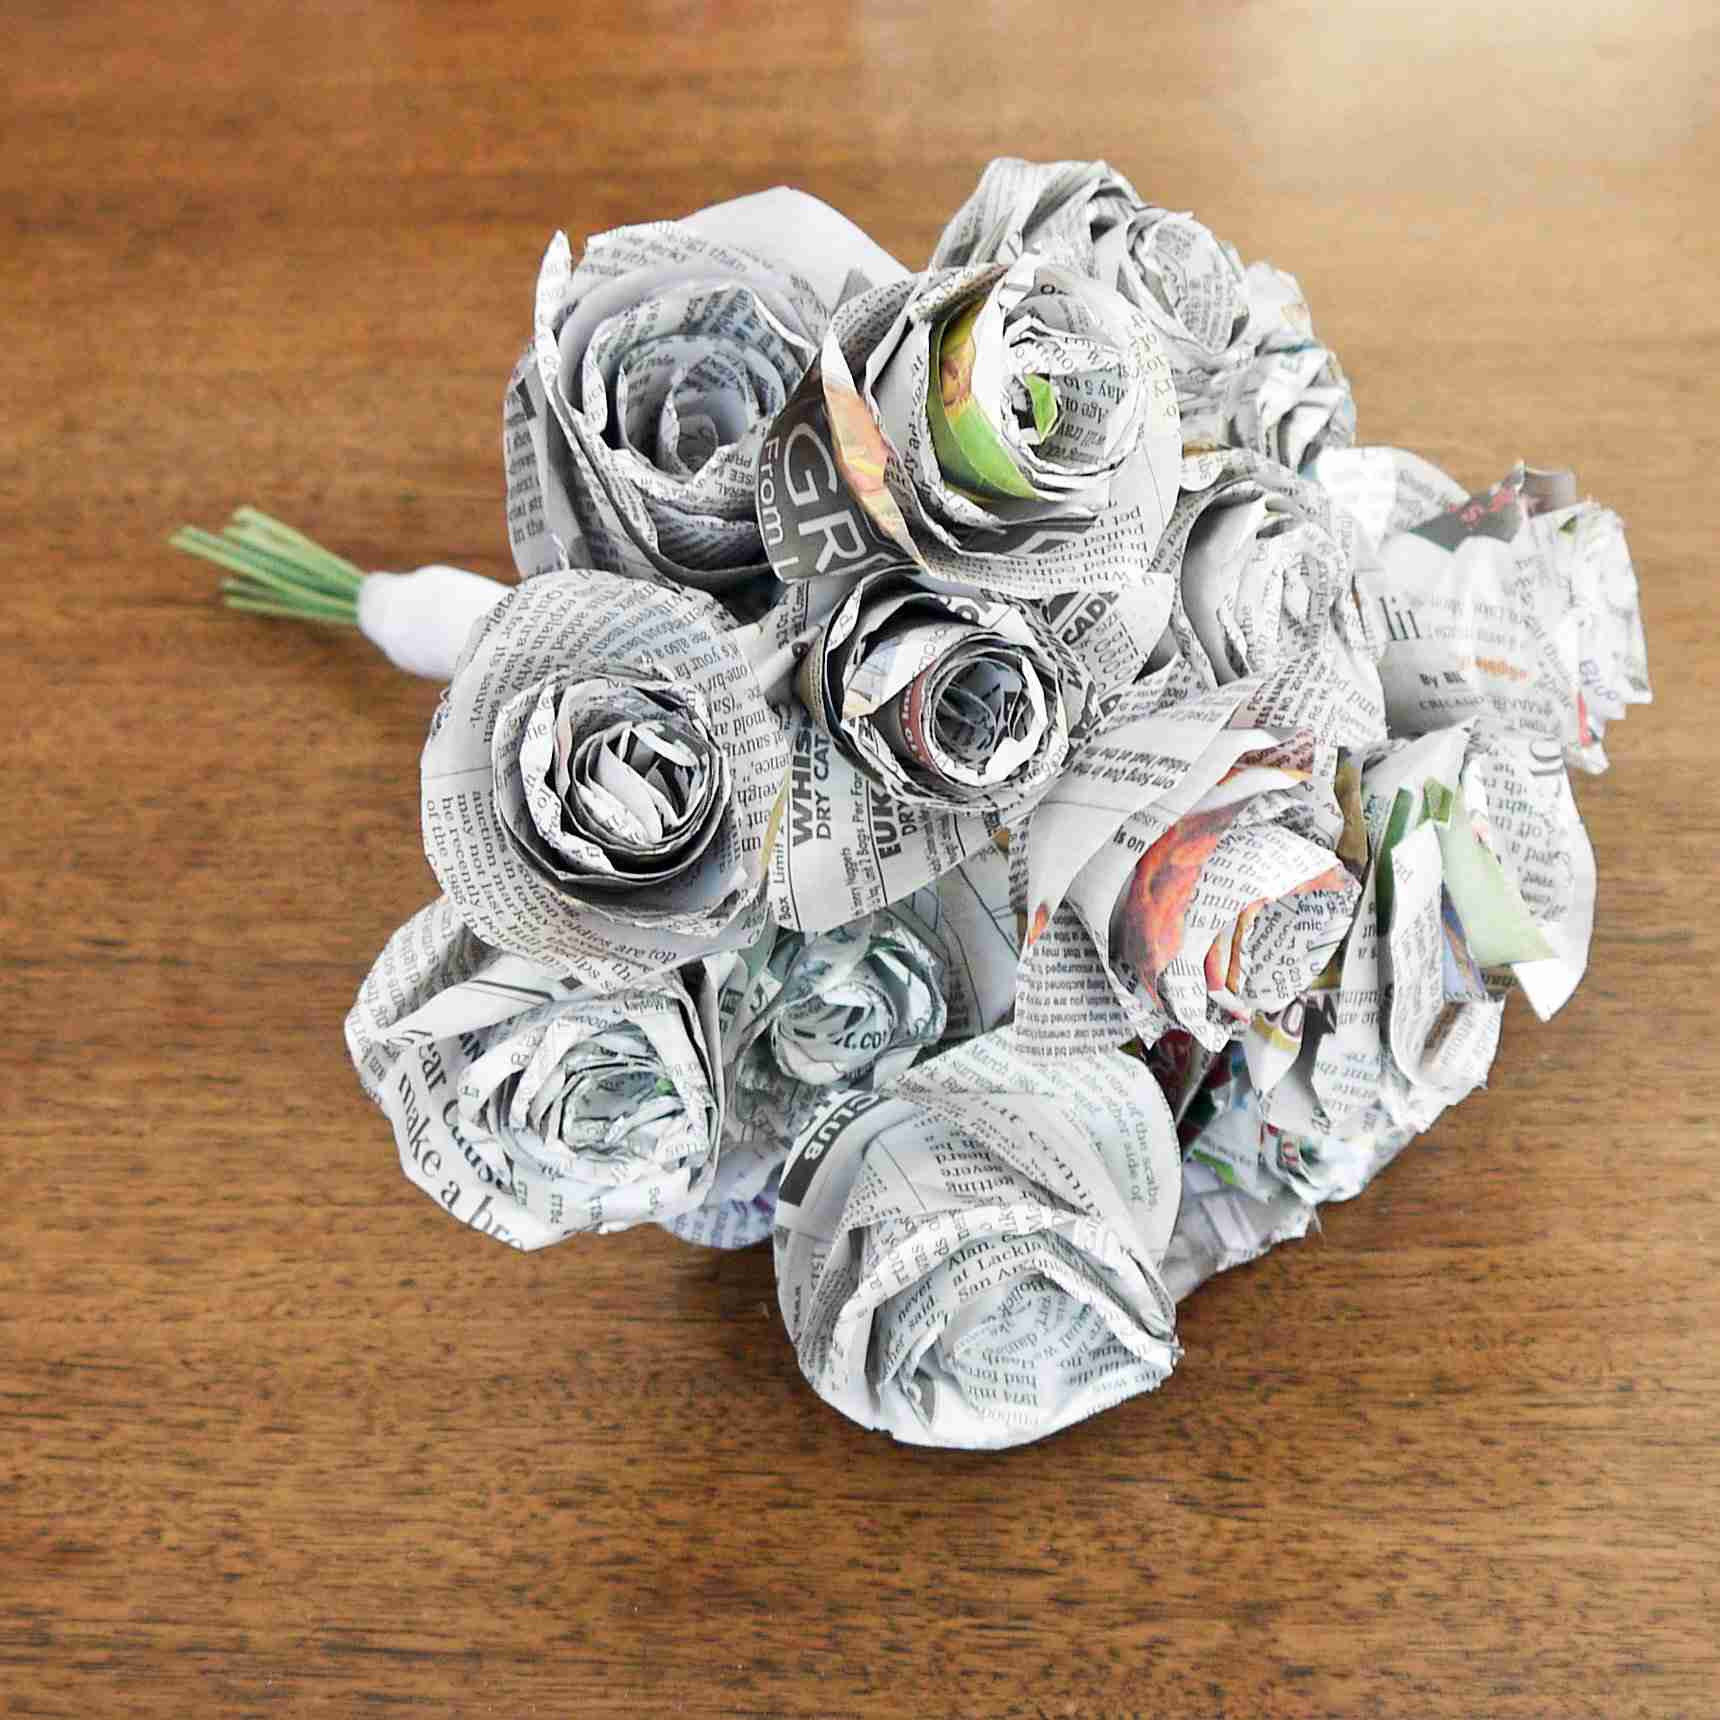 23 Unique Paper Mache Flower Vase 2024 free download paper mache flower vase of 26 creative newspaper crafts with regard to newspaper bouquet 5a2f1936aad52b0036cd77c2